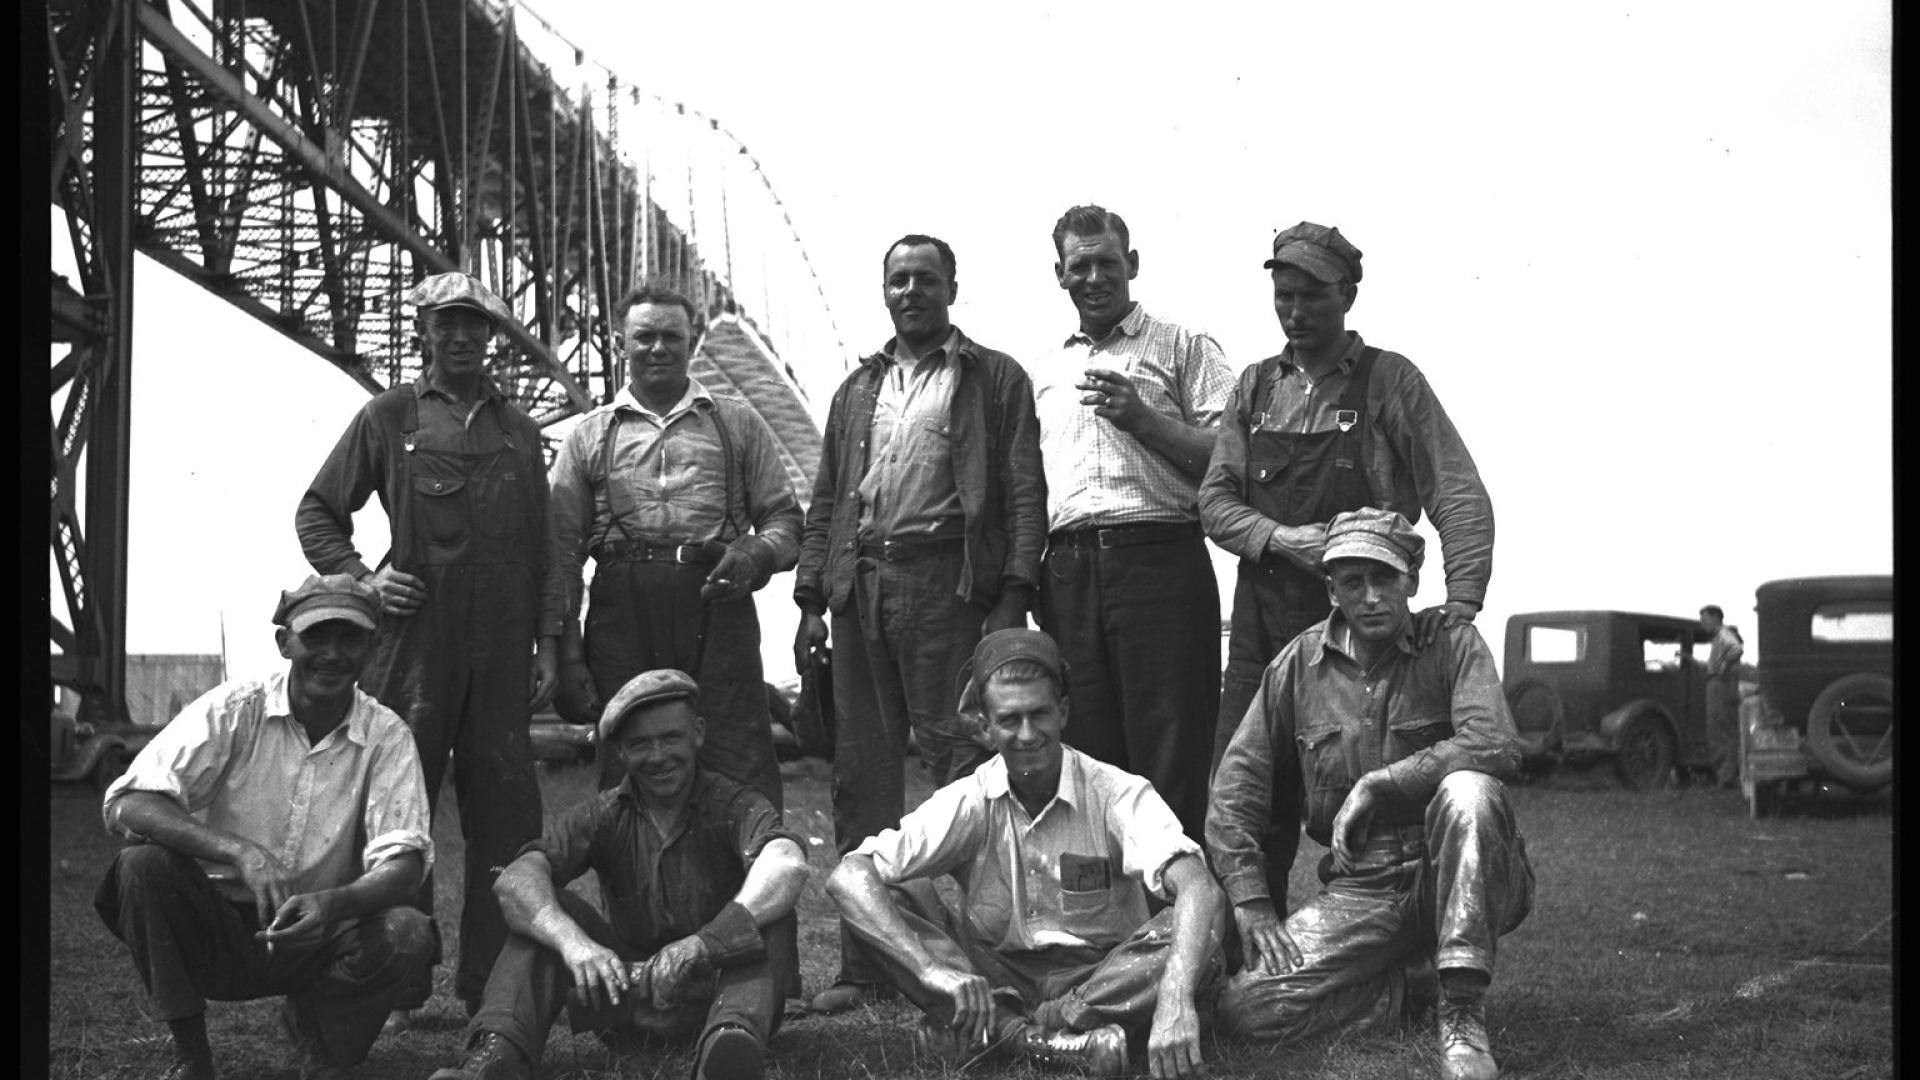 Group of men posing in front of constructed bridge. The bridge stands tall on the background.